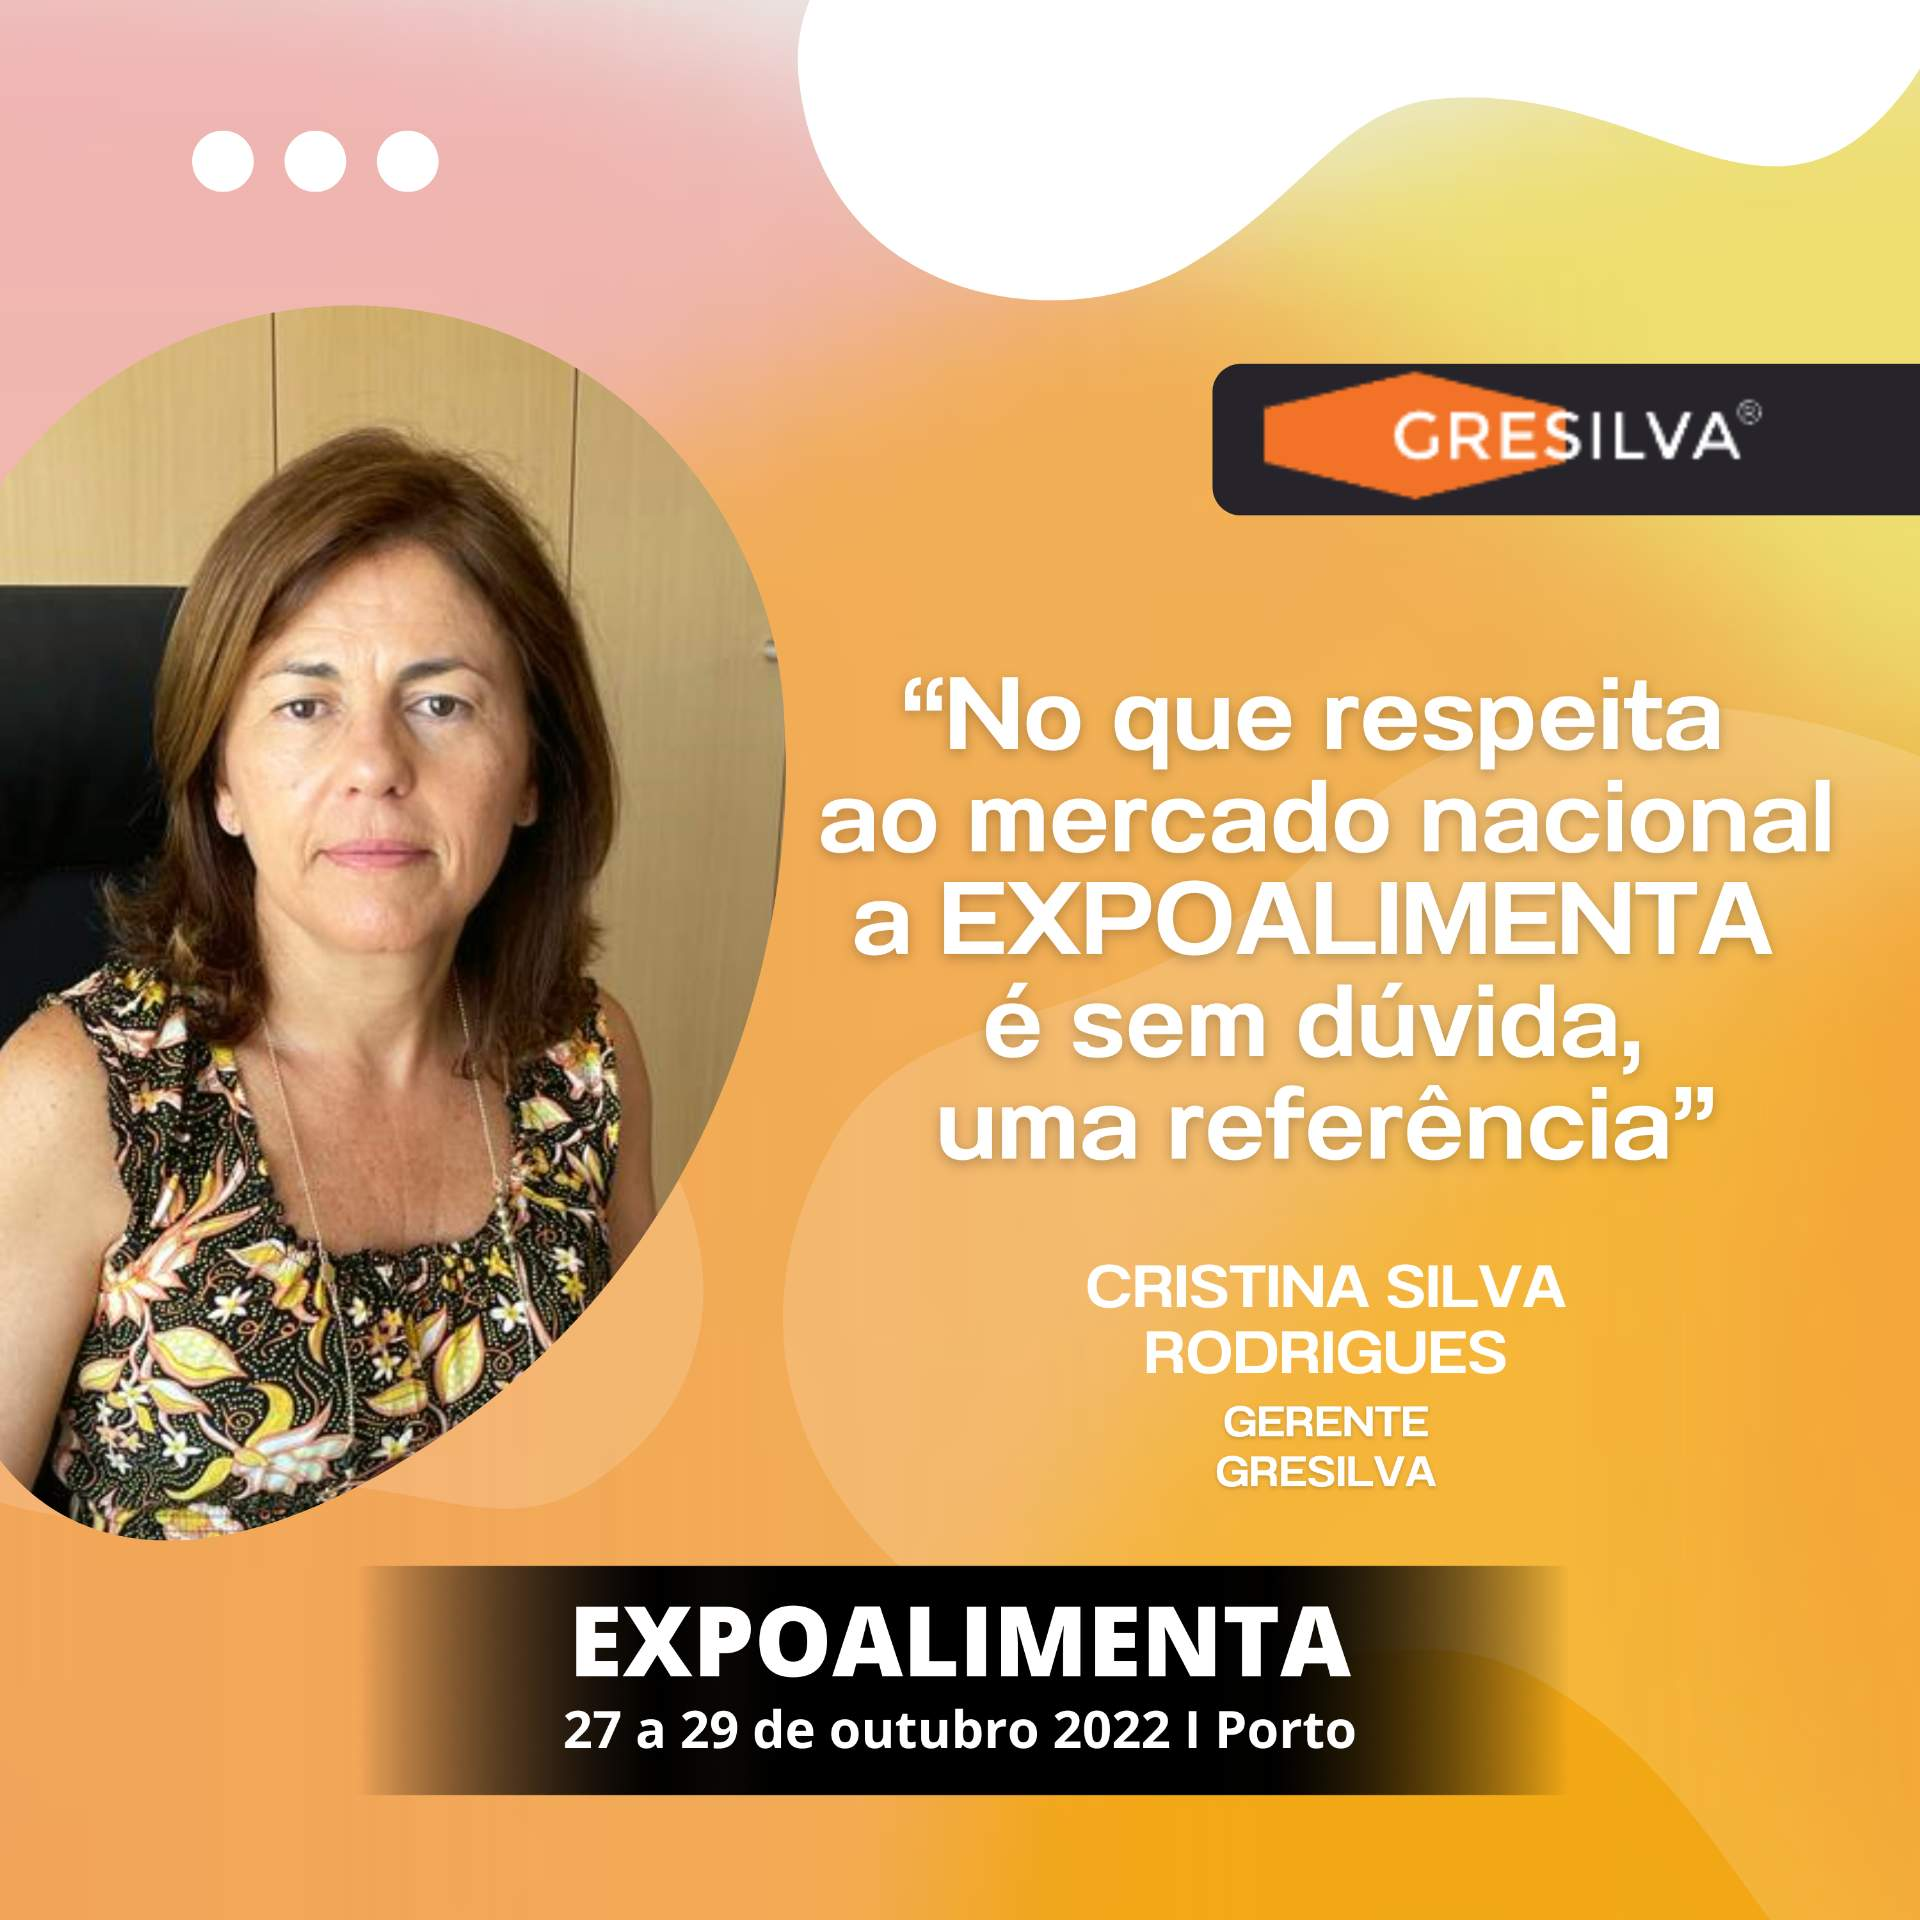 GRESILVA: "As far as the national market is concerned, EXPOALIMENTA is, without a doubt, a reference".